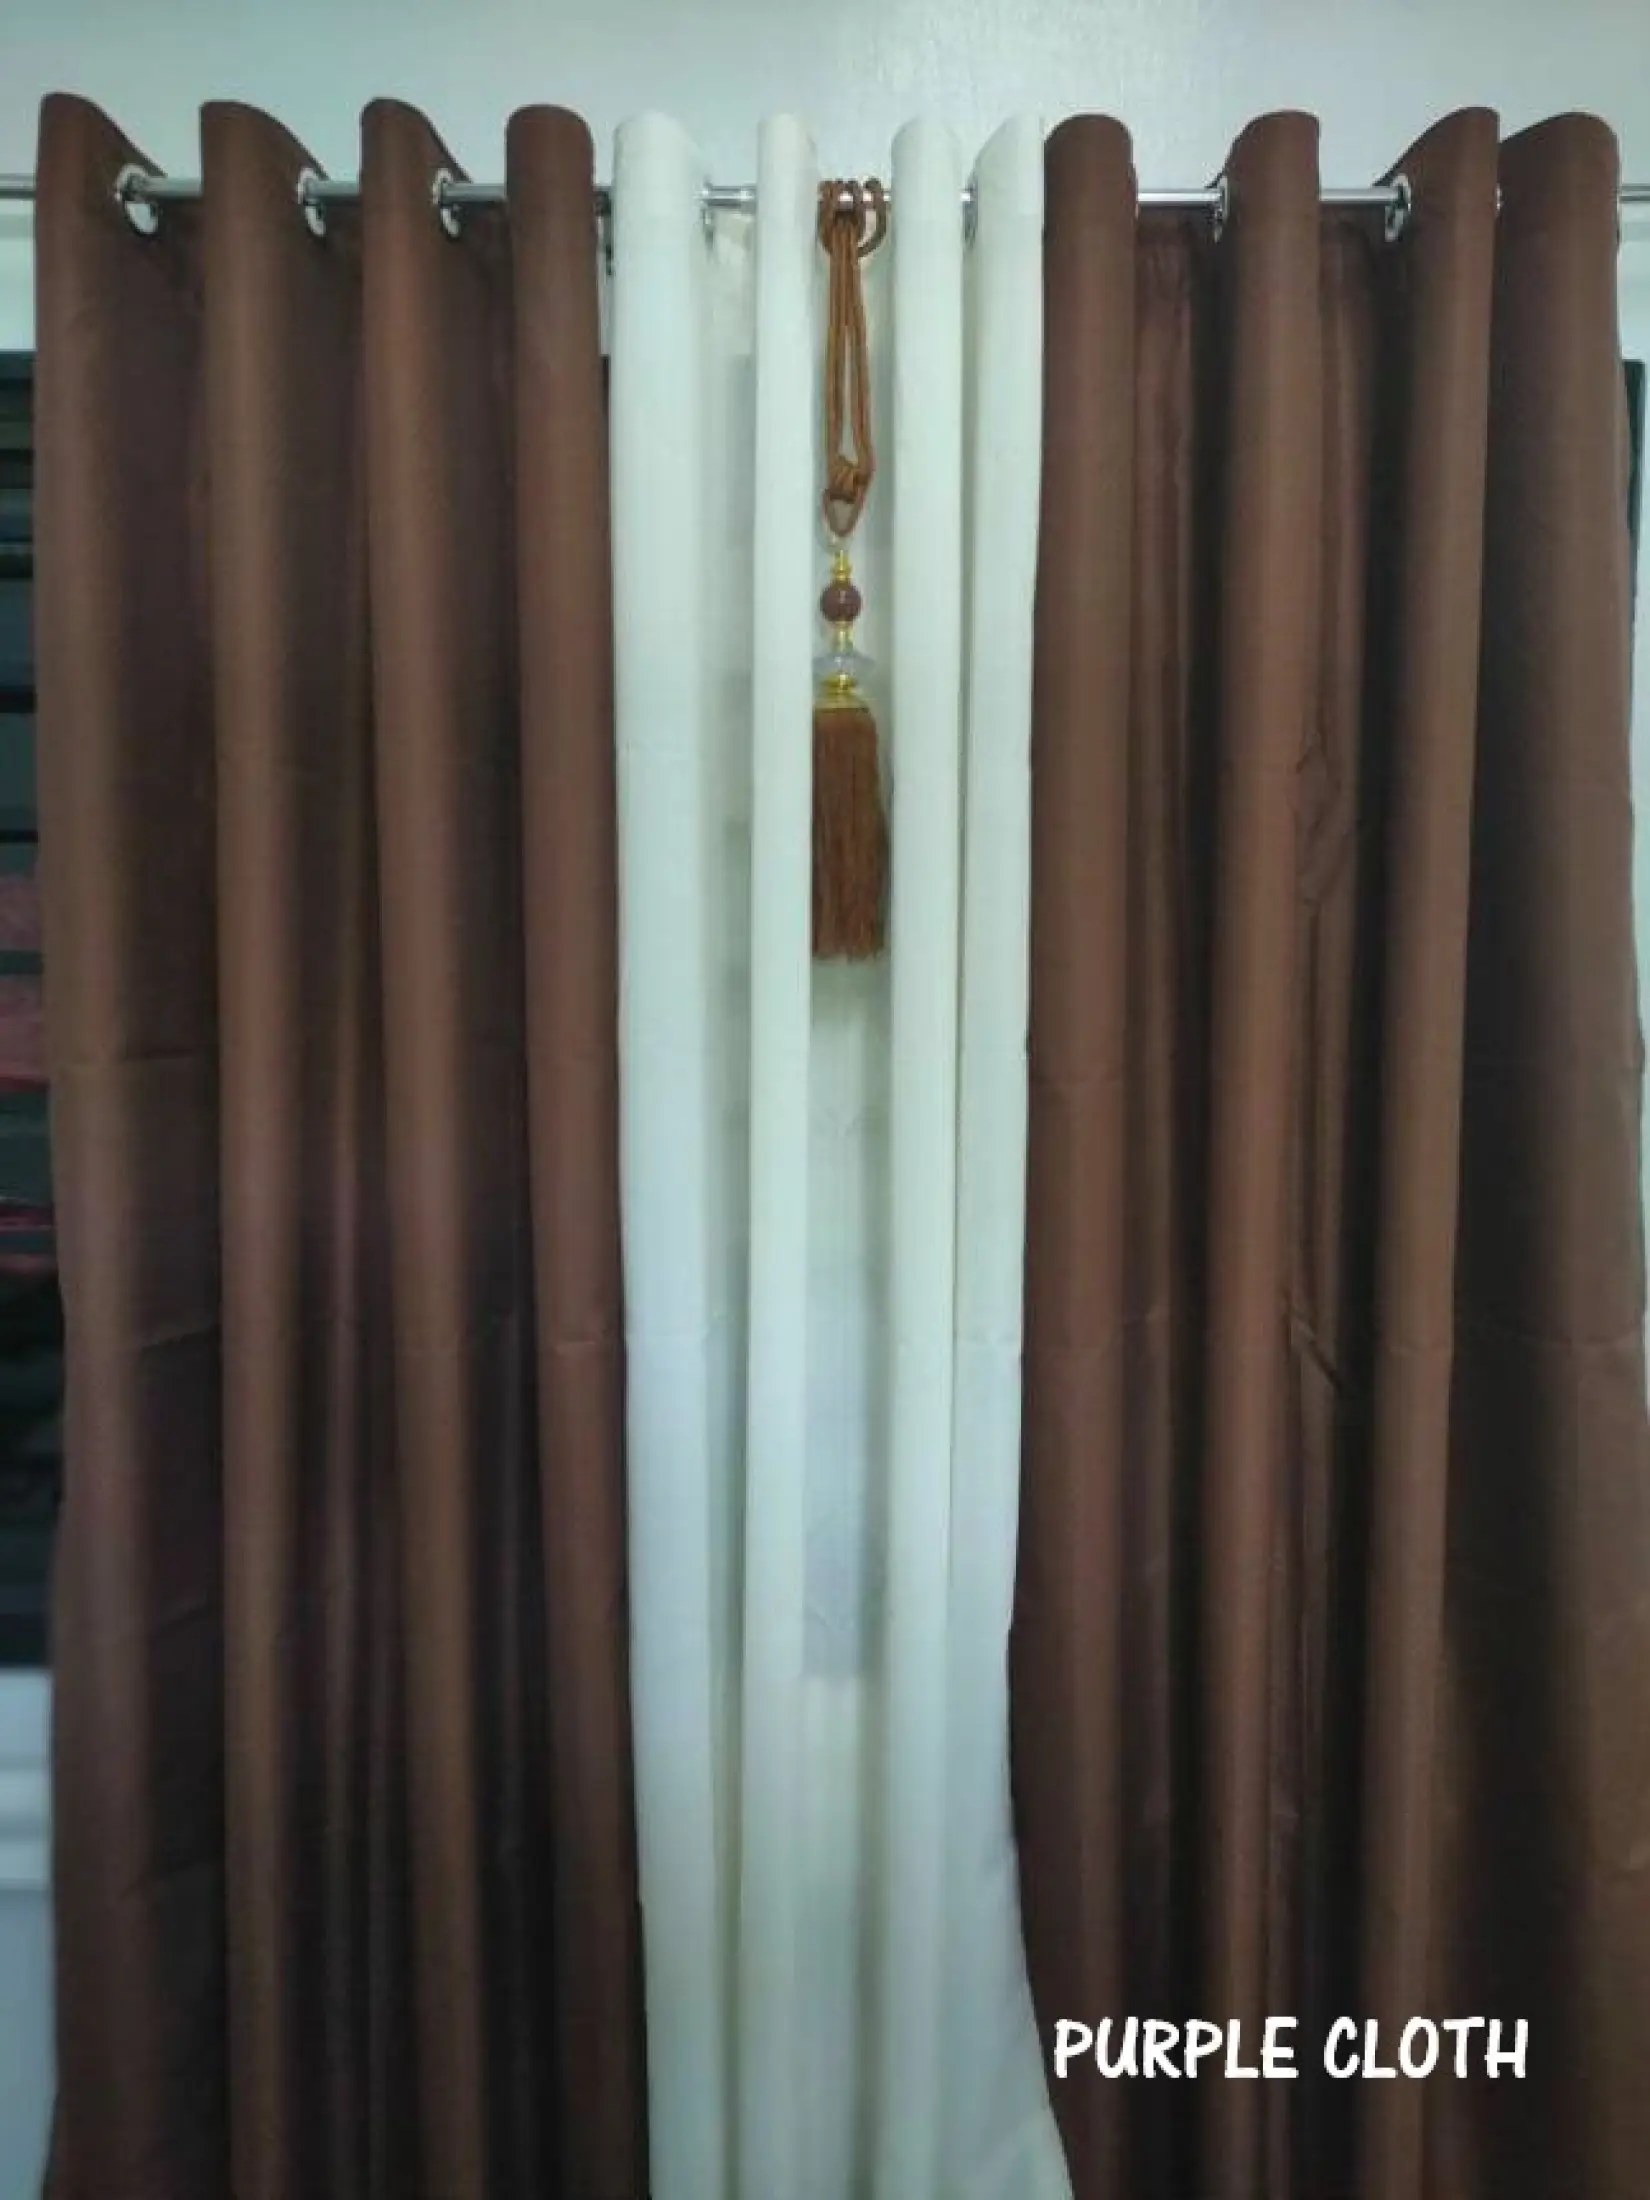 3in1 Katrina Chocolate Brown And Cream, Brown And Cream Curtains